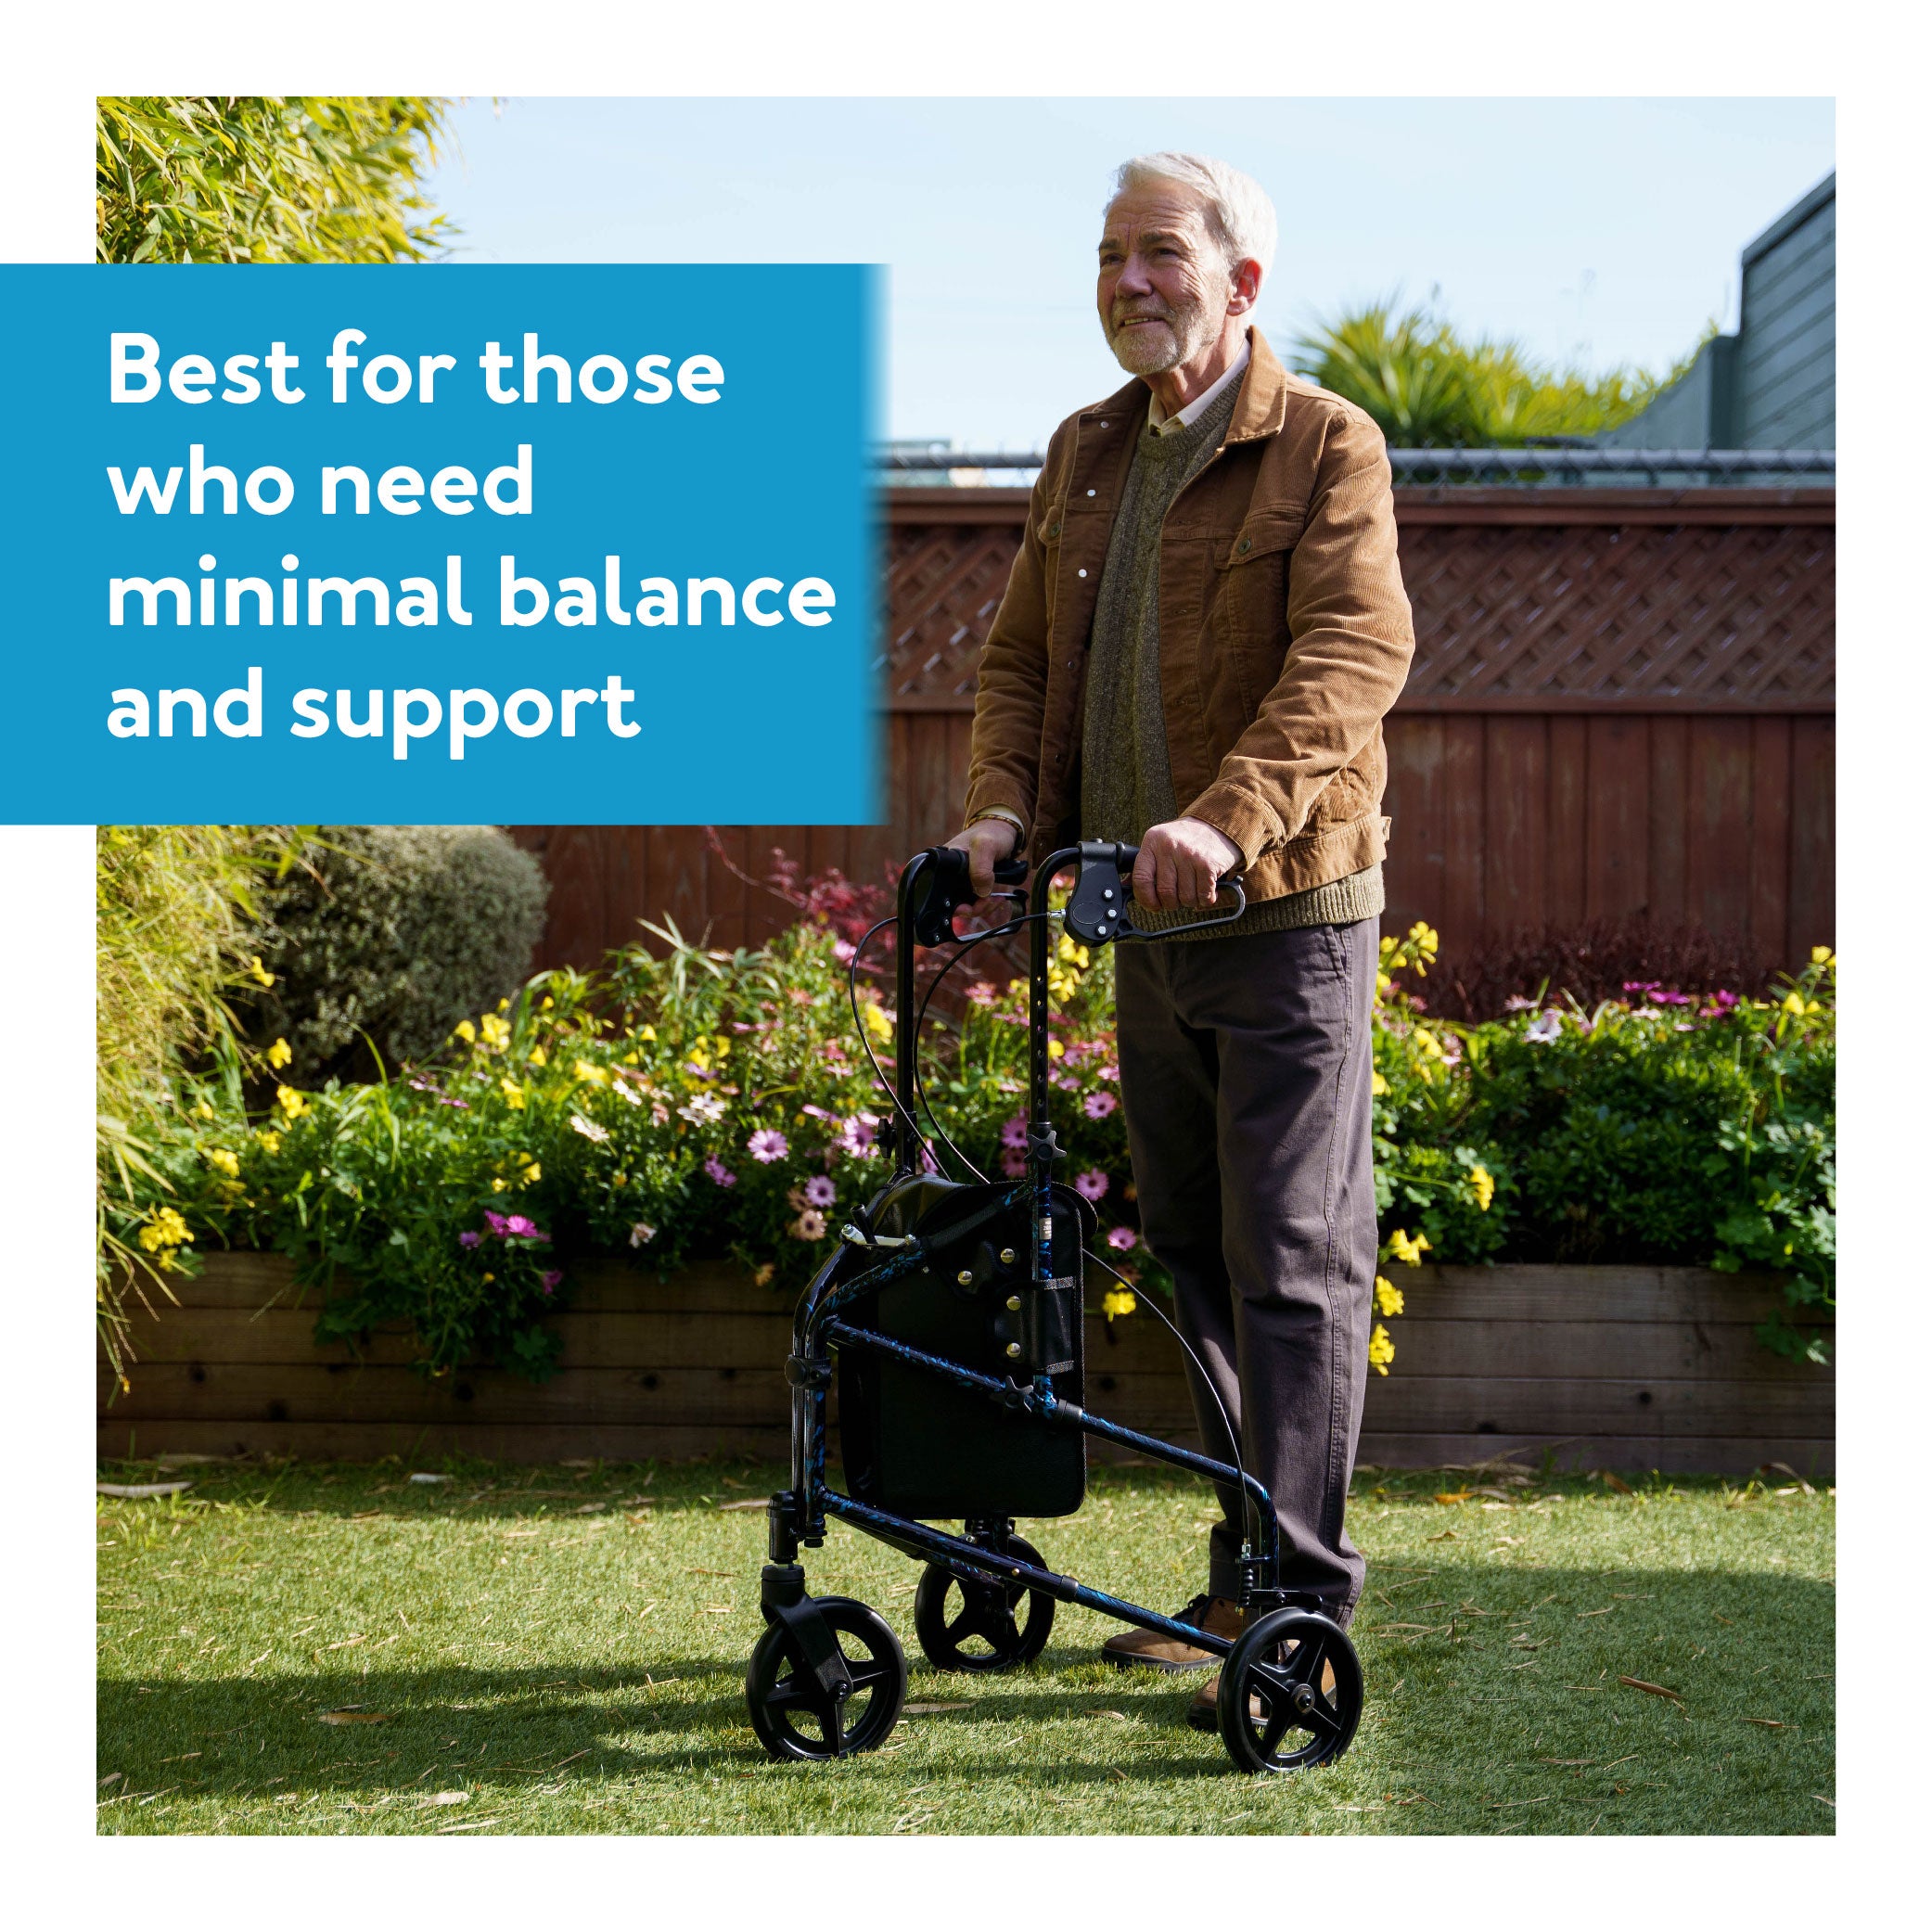 Carex Trio Rolling Walker - Best for those who need minimal balance and support.